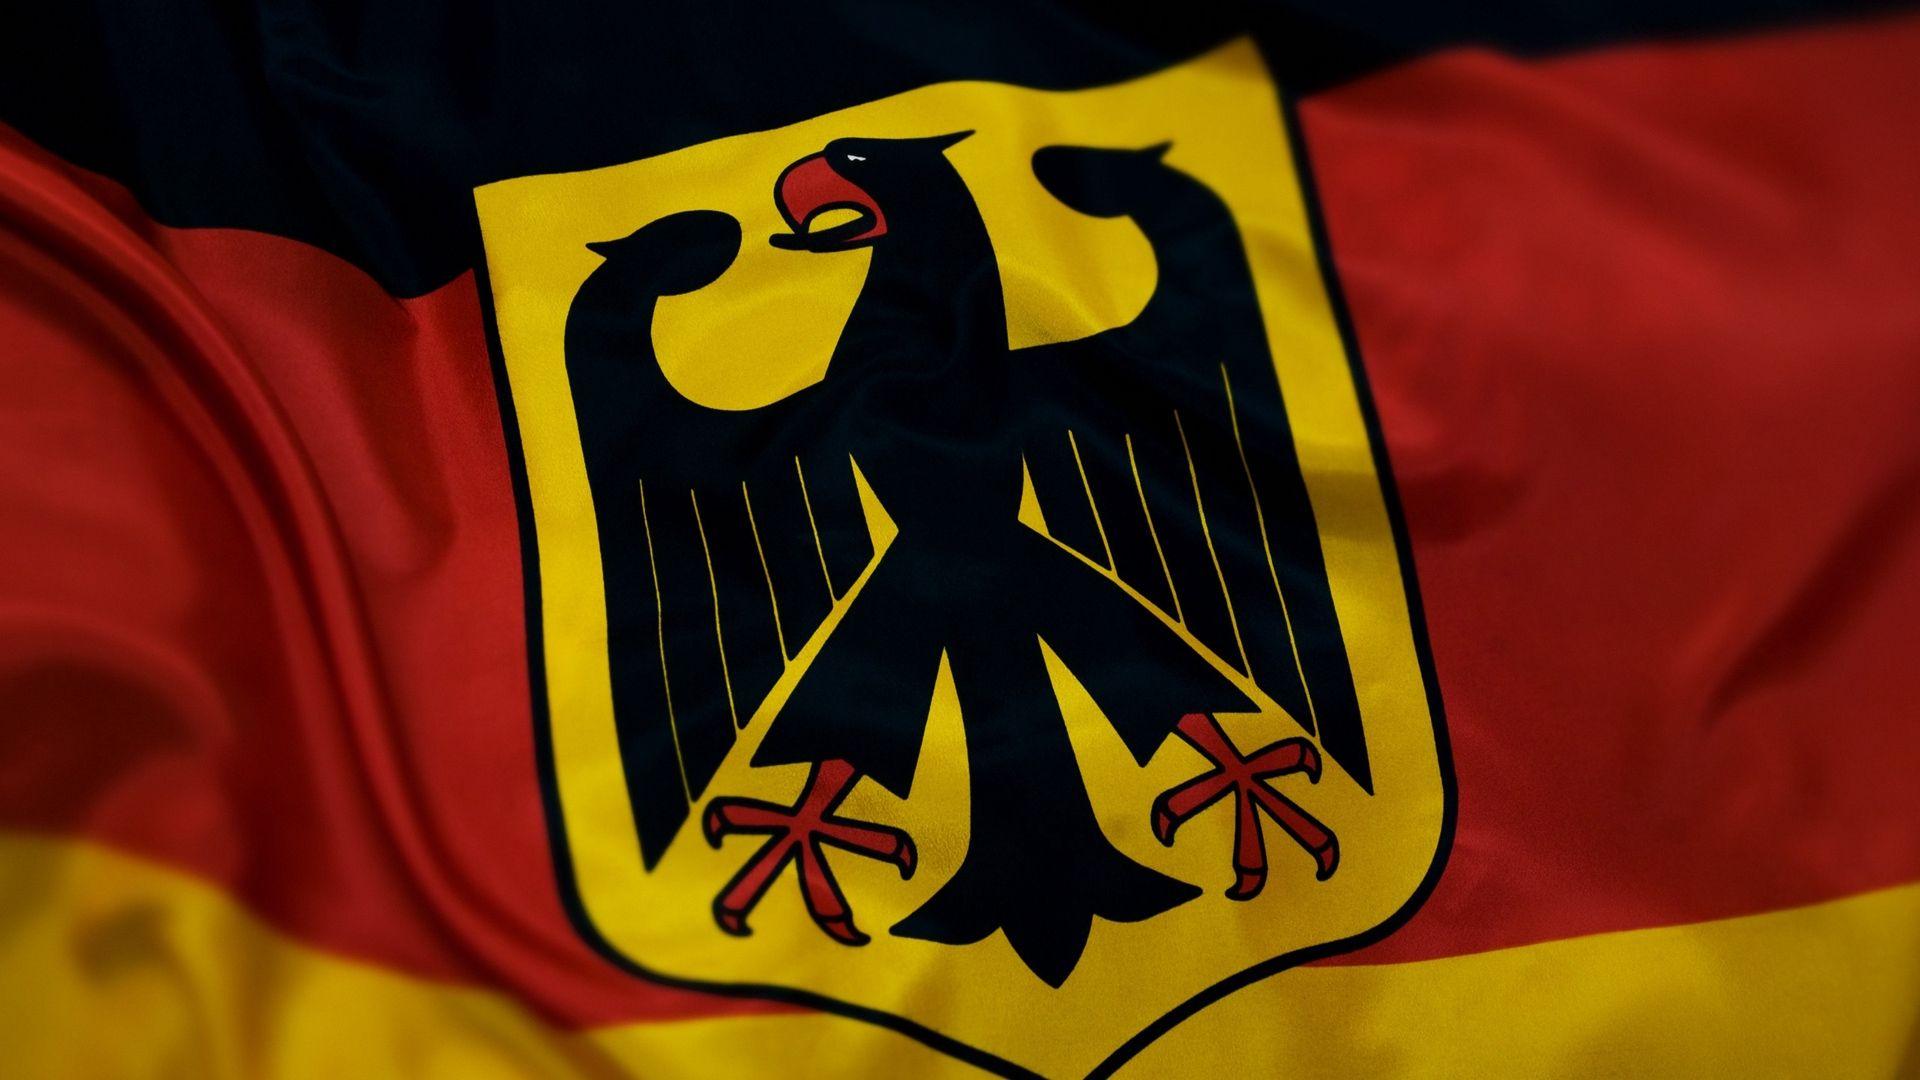 Download wallpaper 1920x1080 germany, flag, coat of arms, fabric